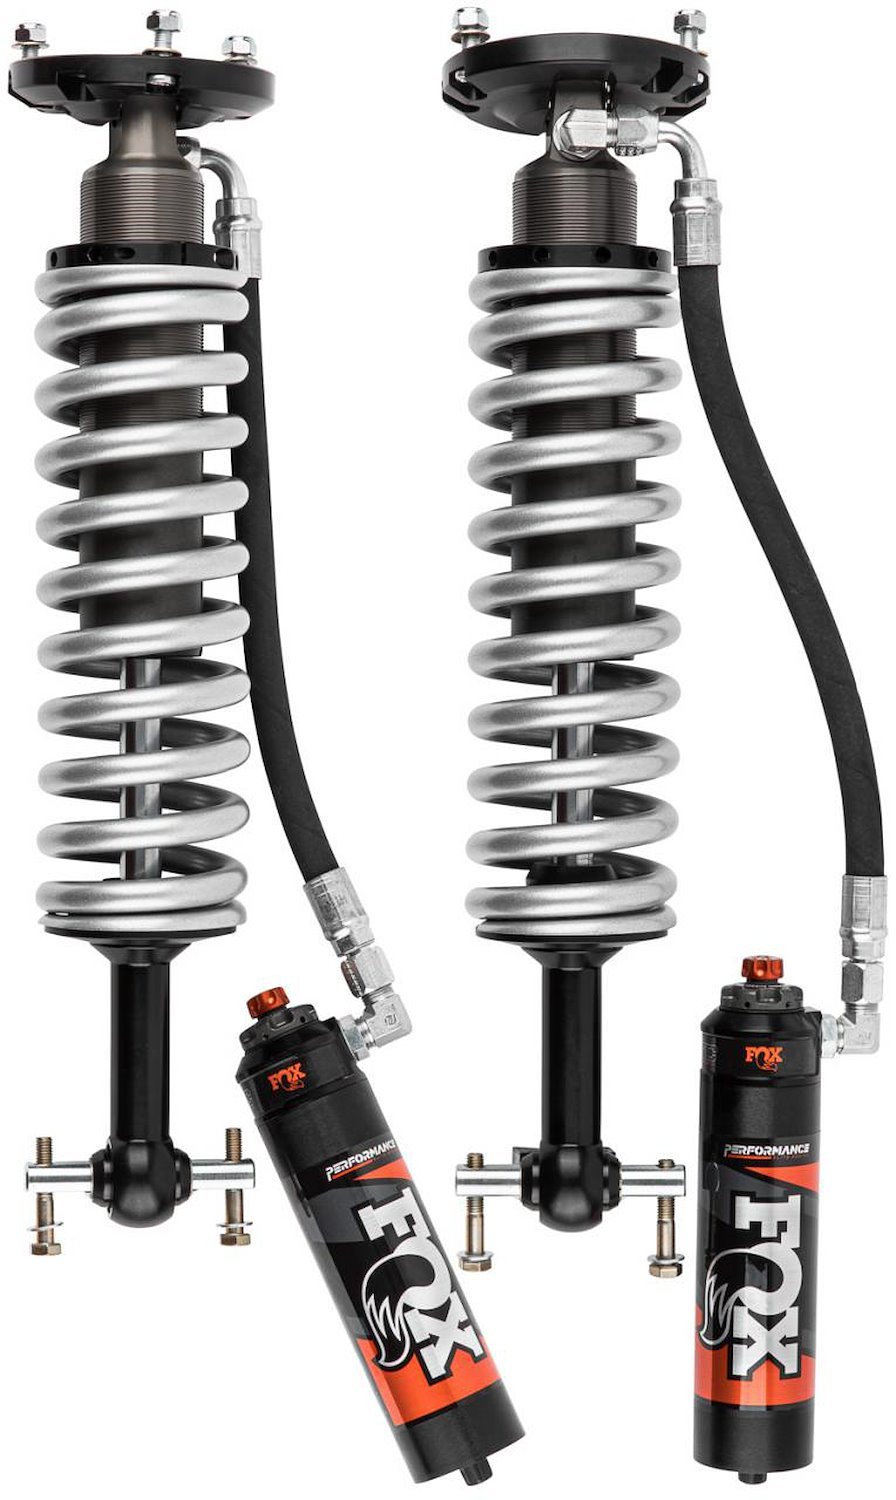 Front Performance Elite-Series Coil-Over Shock Set fits Select Late-Model Chevy Silverado 1500, GMC Sierra 1500 [0-2 in. Lift]